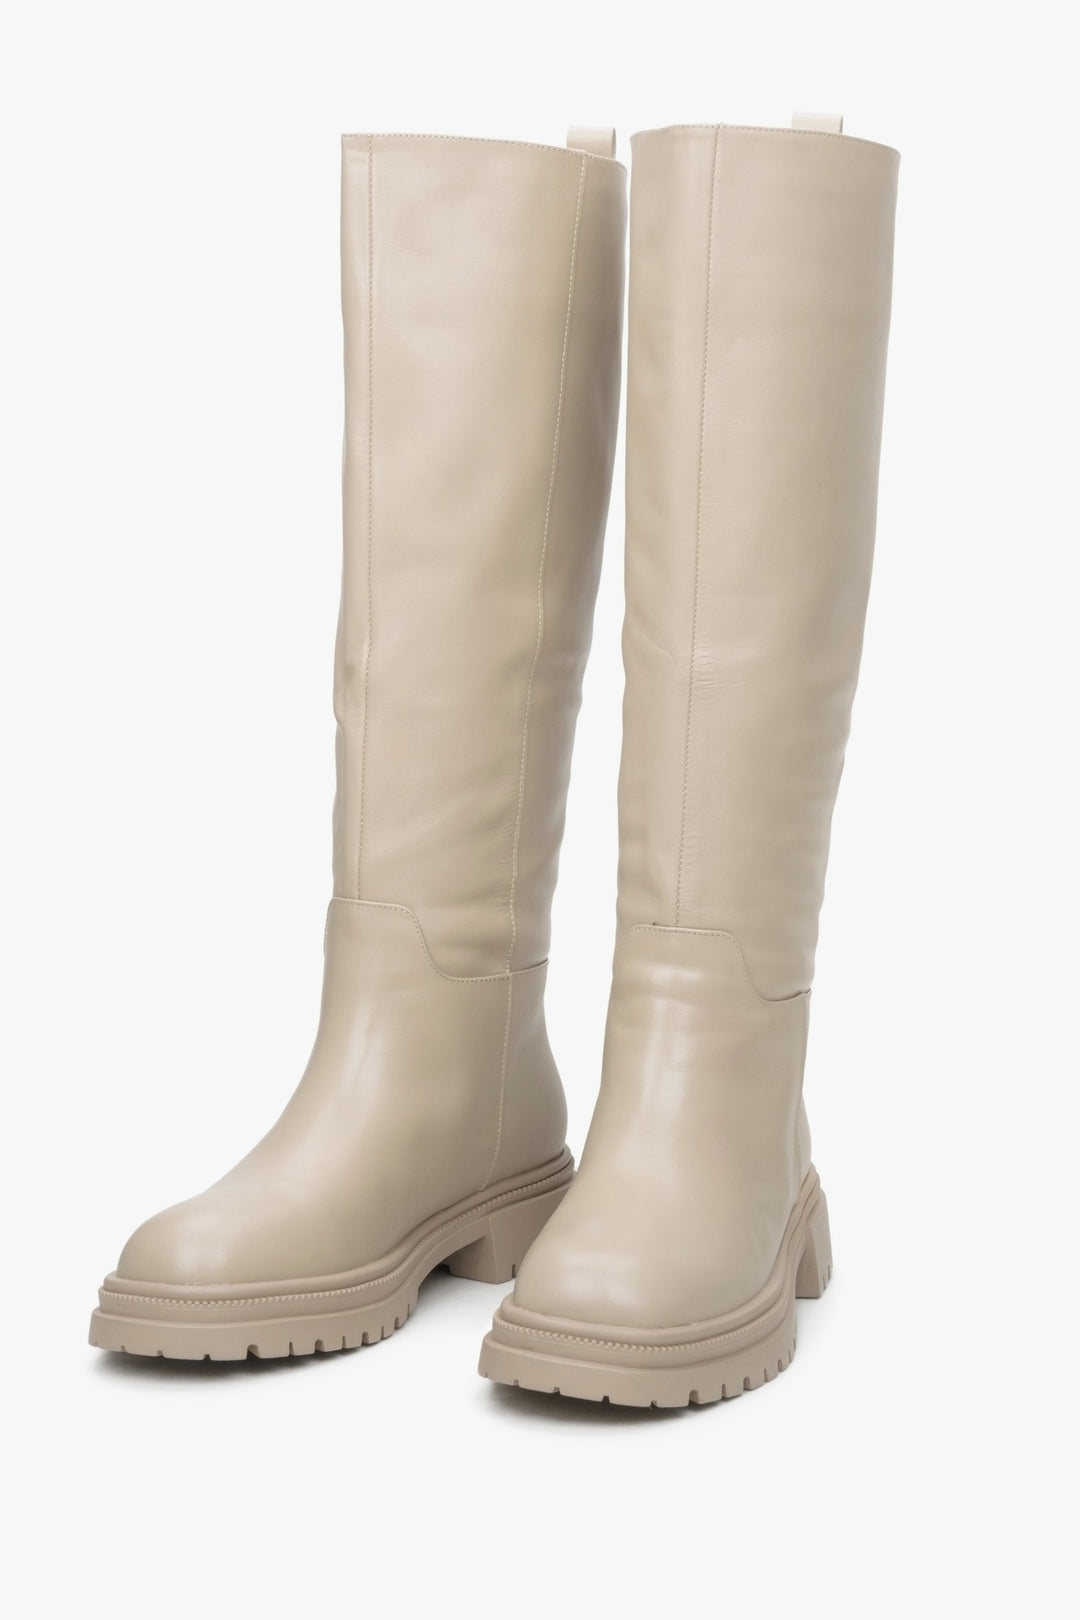 Women's light beige leather high boots with elastic shaft by Estro.